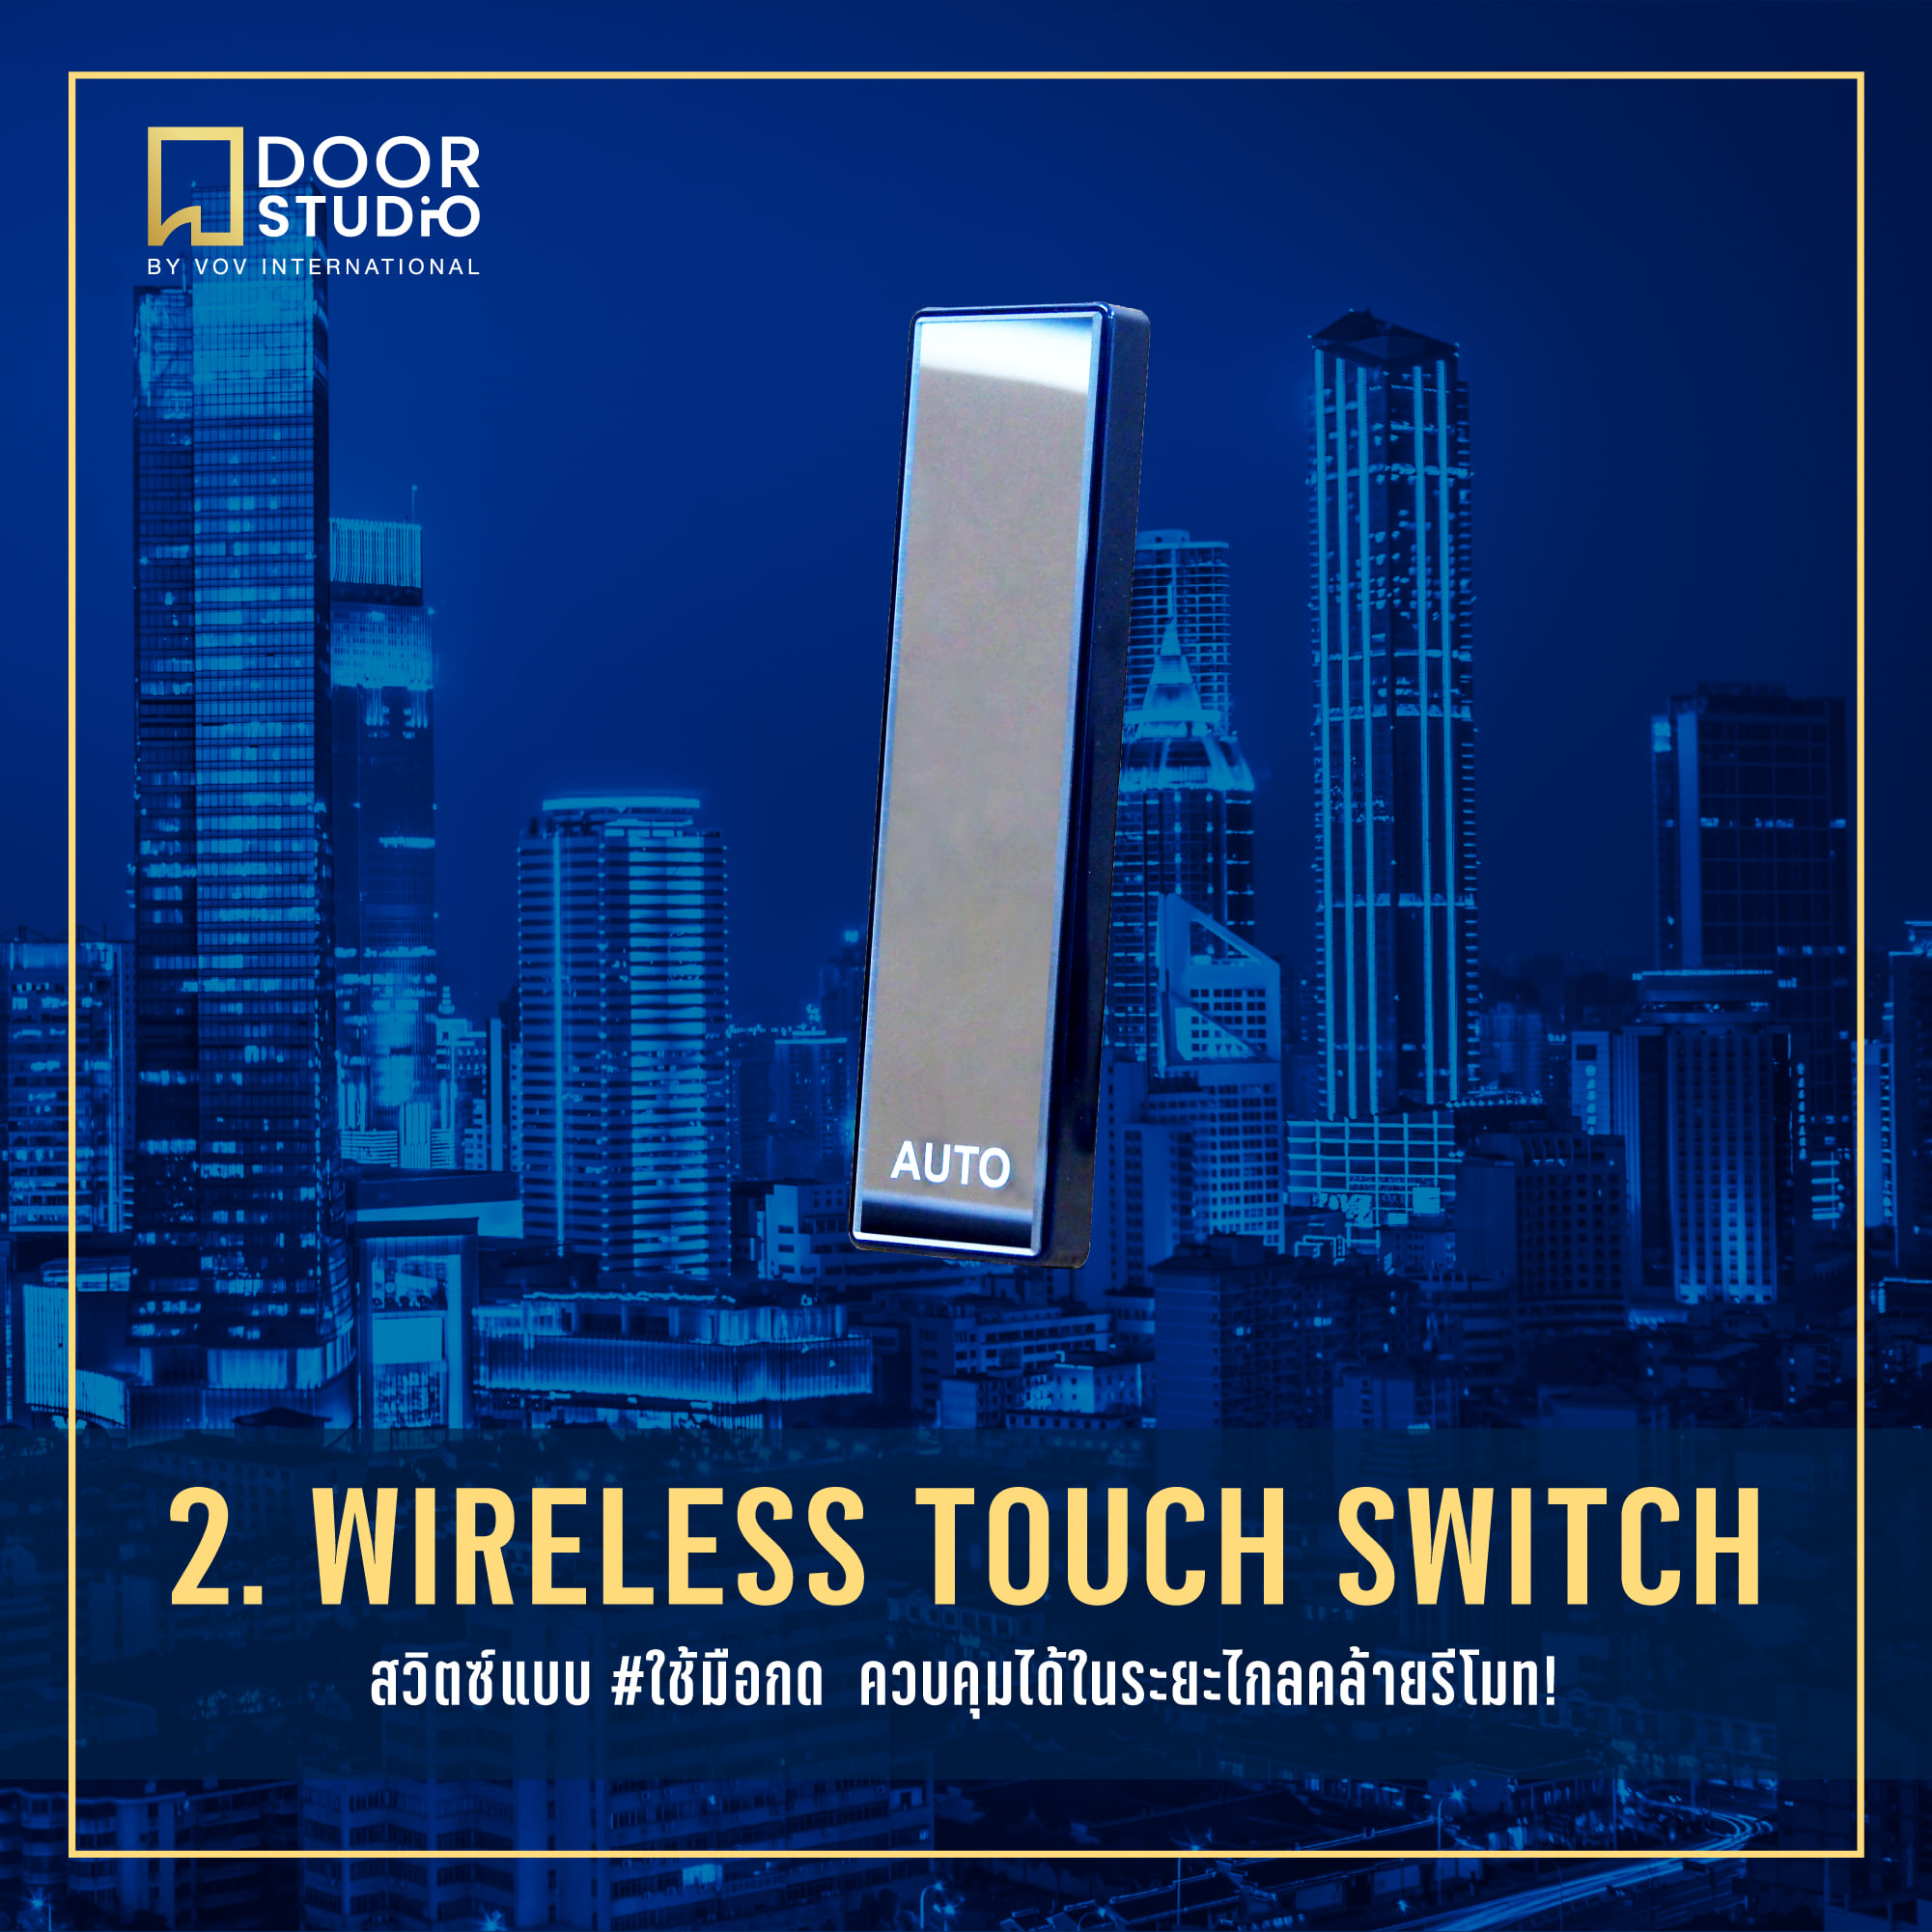 Wireless-Tocuch-Switch